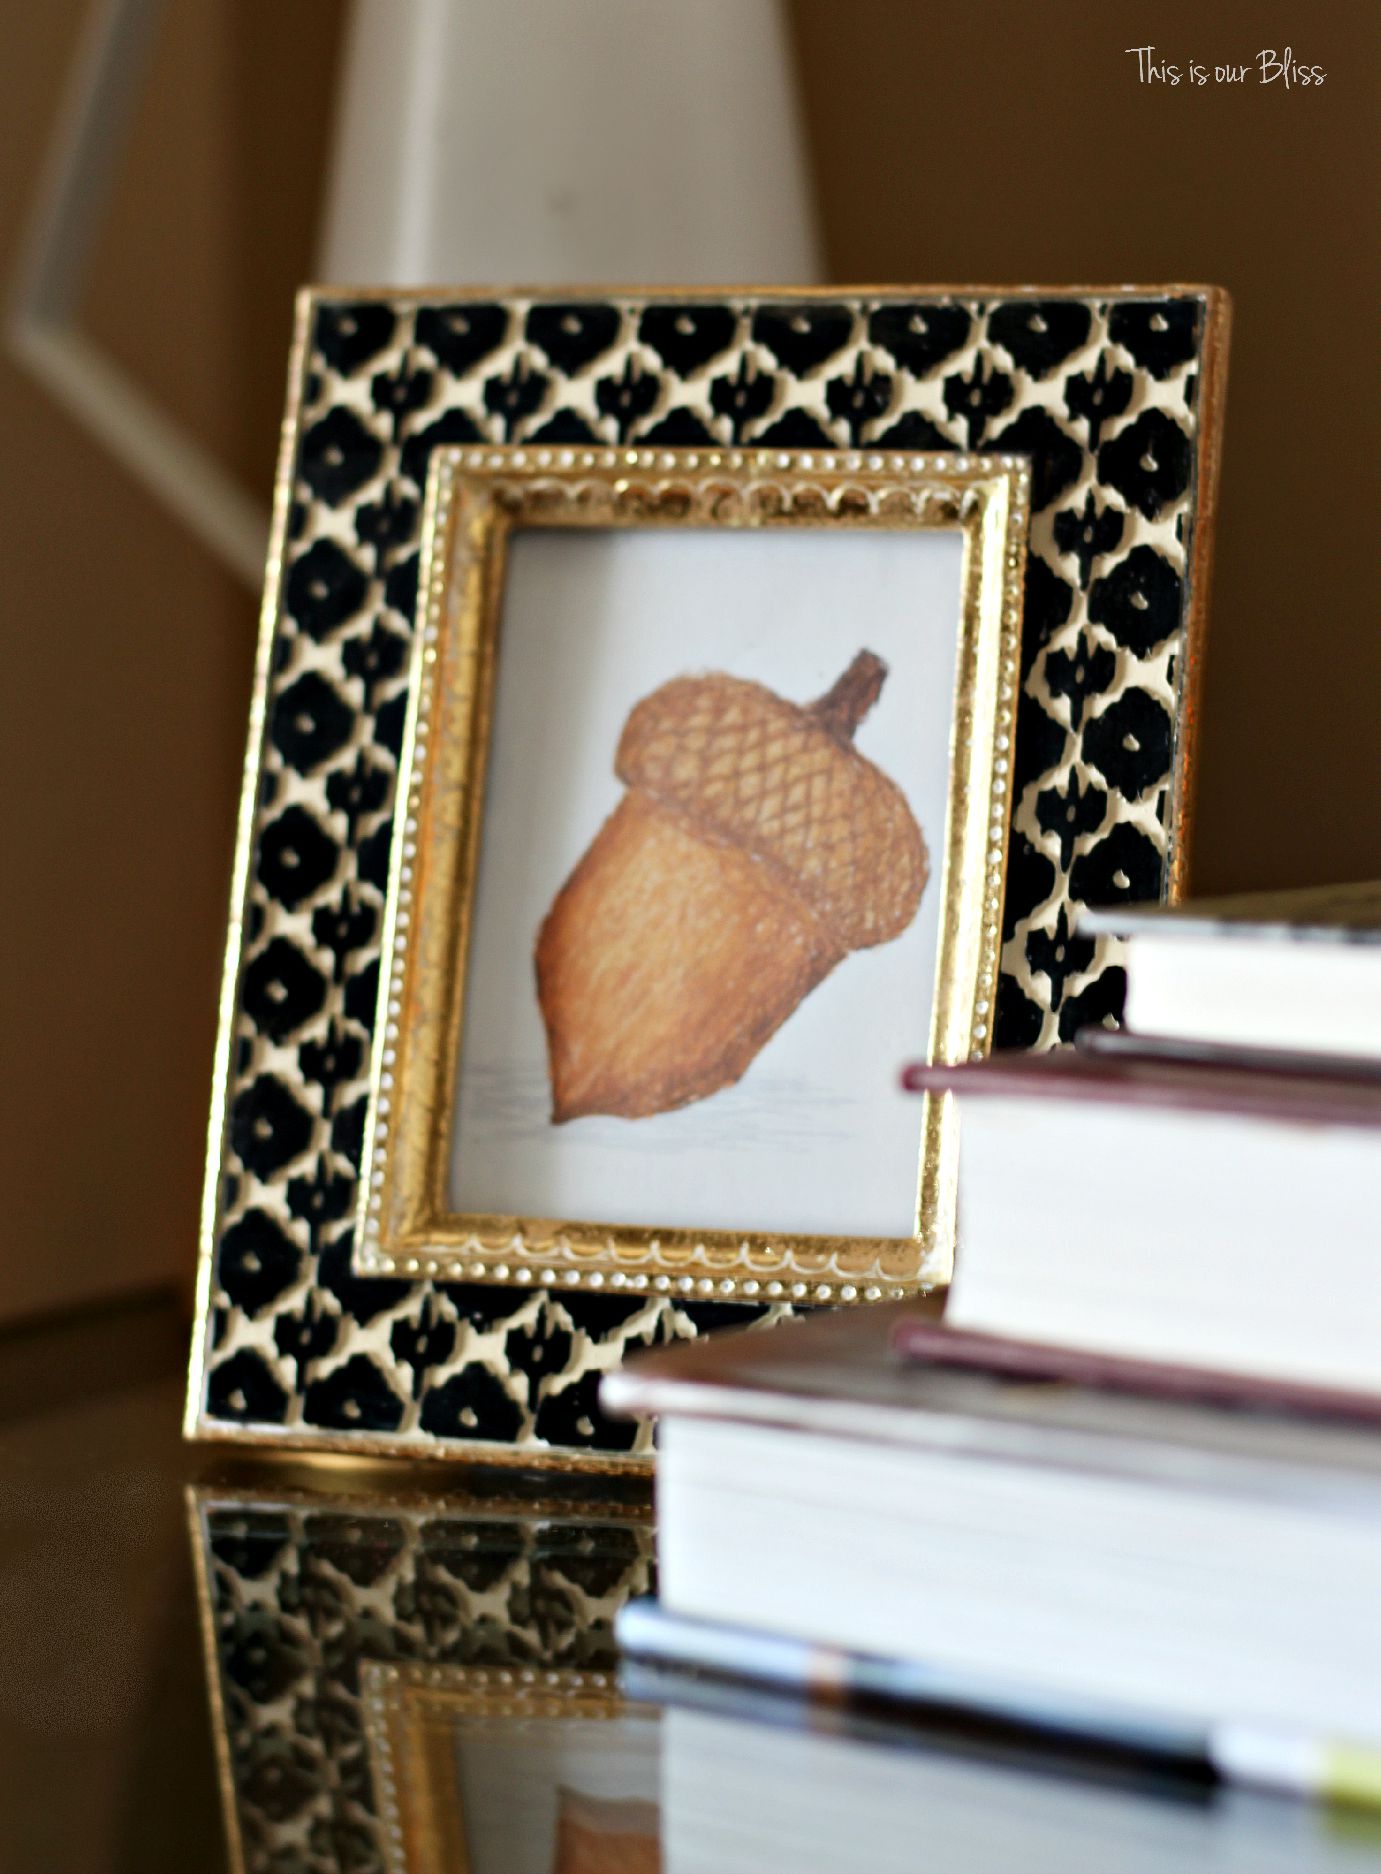 Fall entryway - fall vignette - entryway table styling - fall decor - neutral fall decor -staircase view - fall word art - mini framed acorn art 1 - This is our Bliss